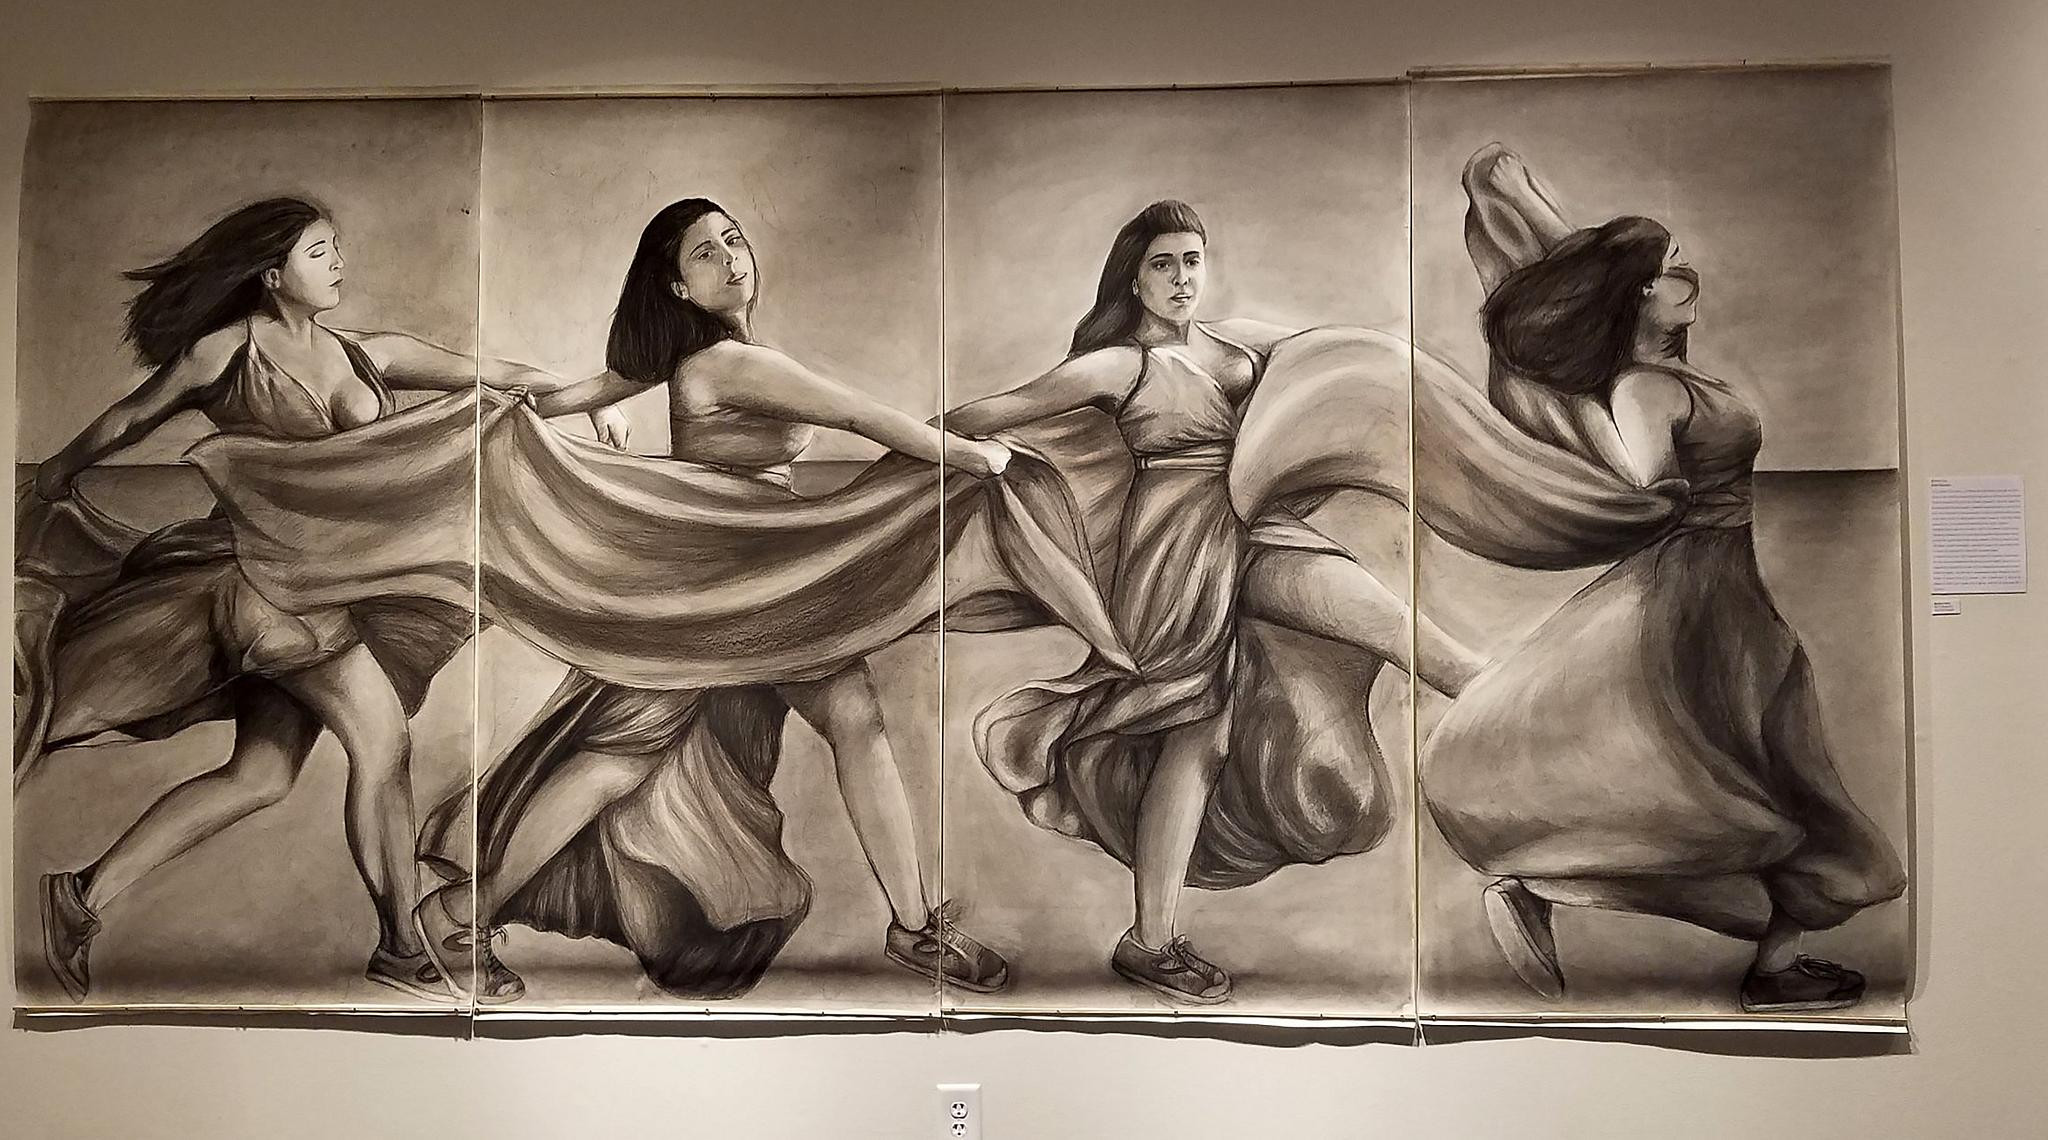  6 ft x 12 ft charcoal drawing on paper. 